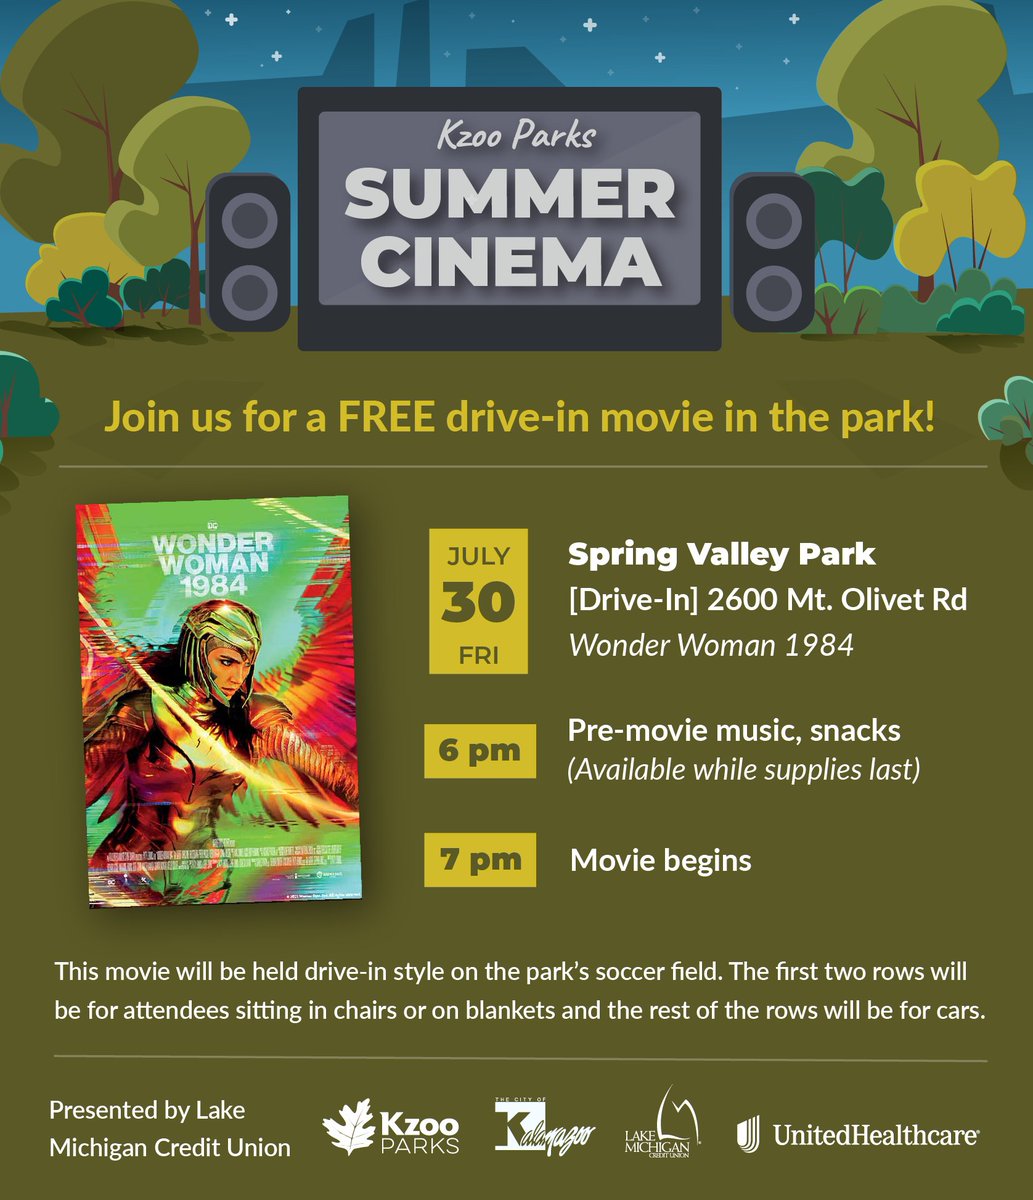 Have you ever been to a drive-in movie? Now’s your chance!

Join us this Friday for a FREE showing of Wonder Woman 1984 at Spring Valley Park. Presented by @LMCU and sponsored by @UHC https://t.co/TJnG0uNiX2